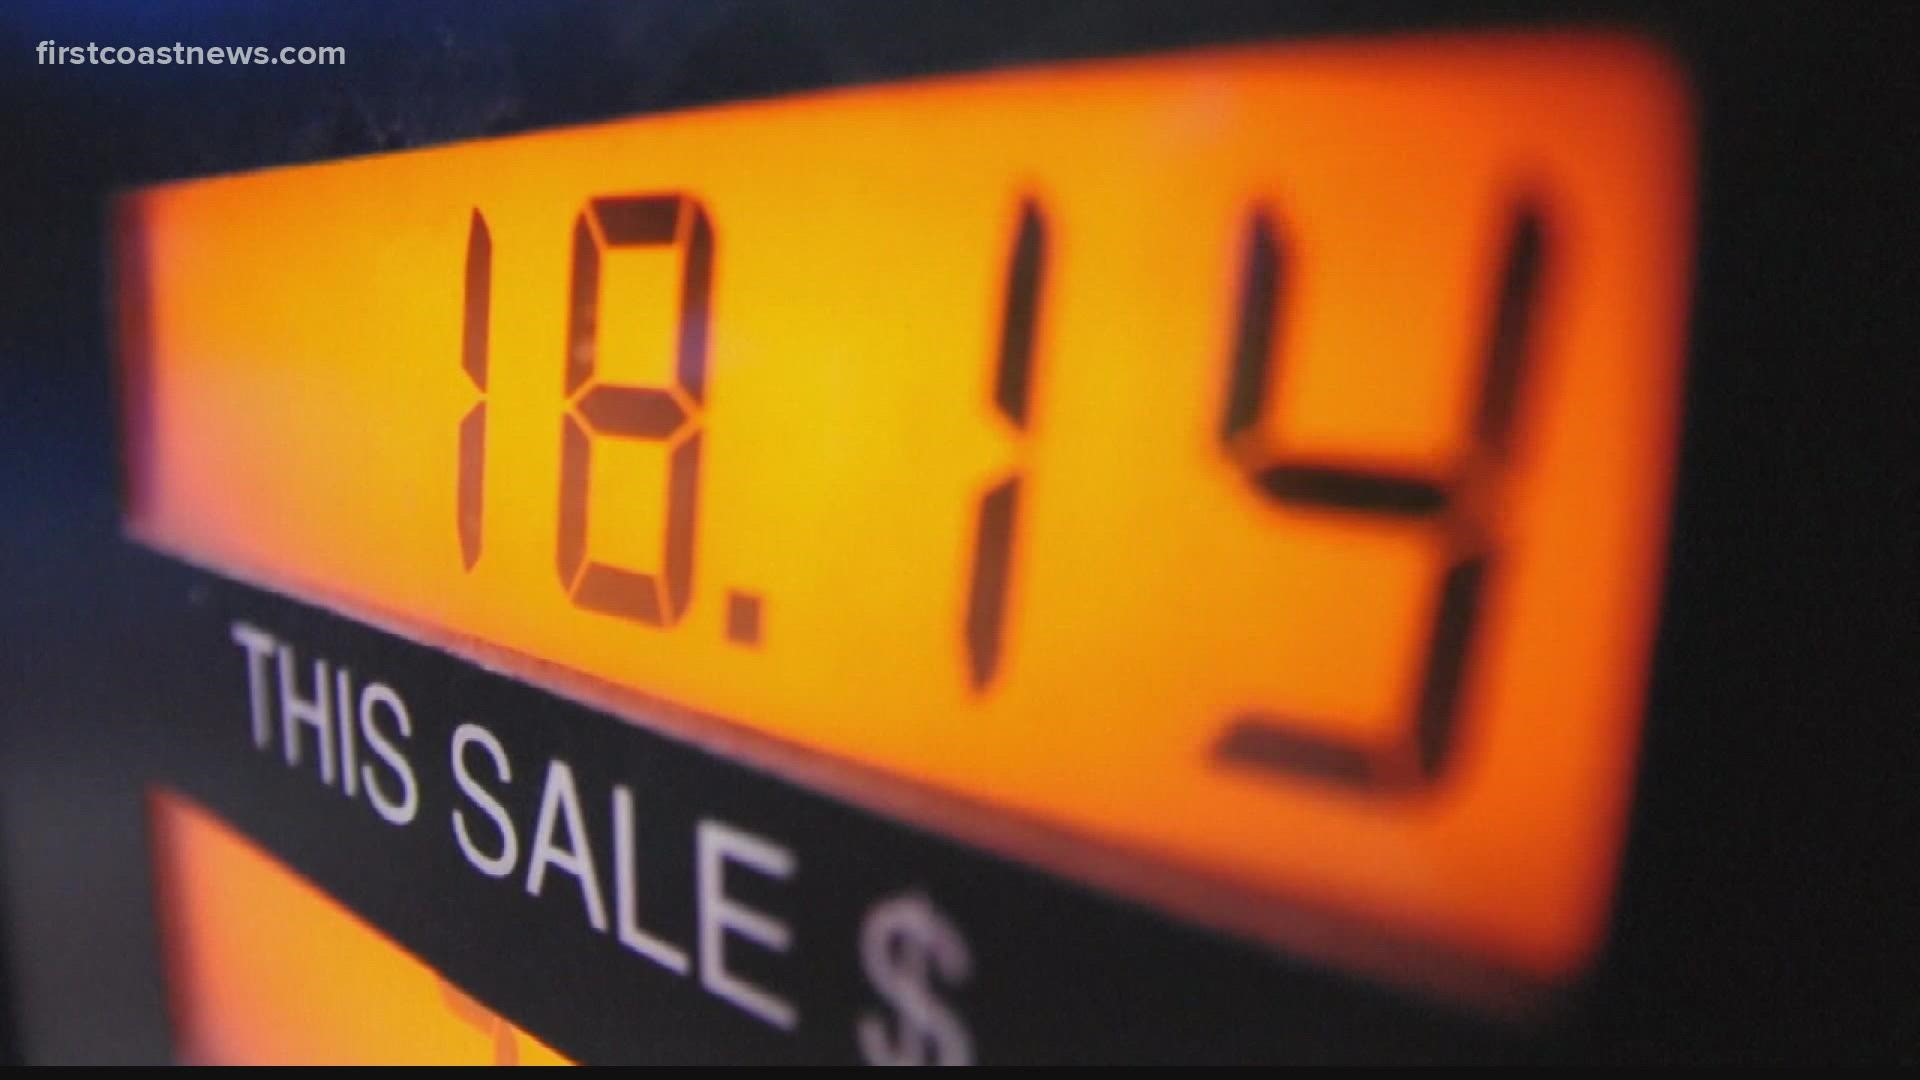 About a week after rapidly rising, oil prices are now falling, affecting gas prices.